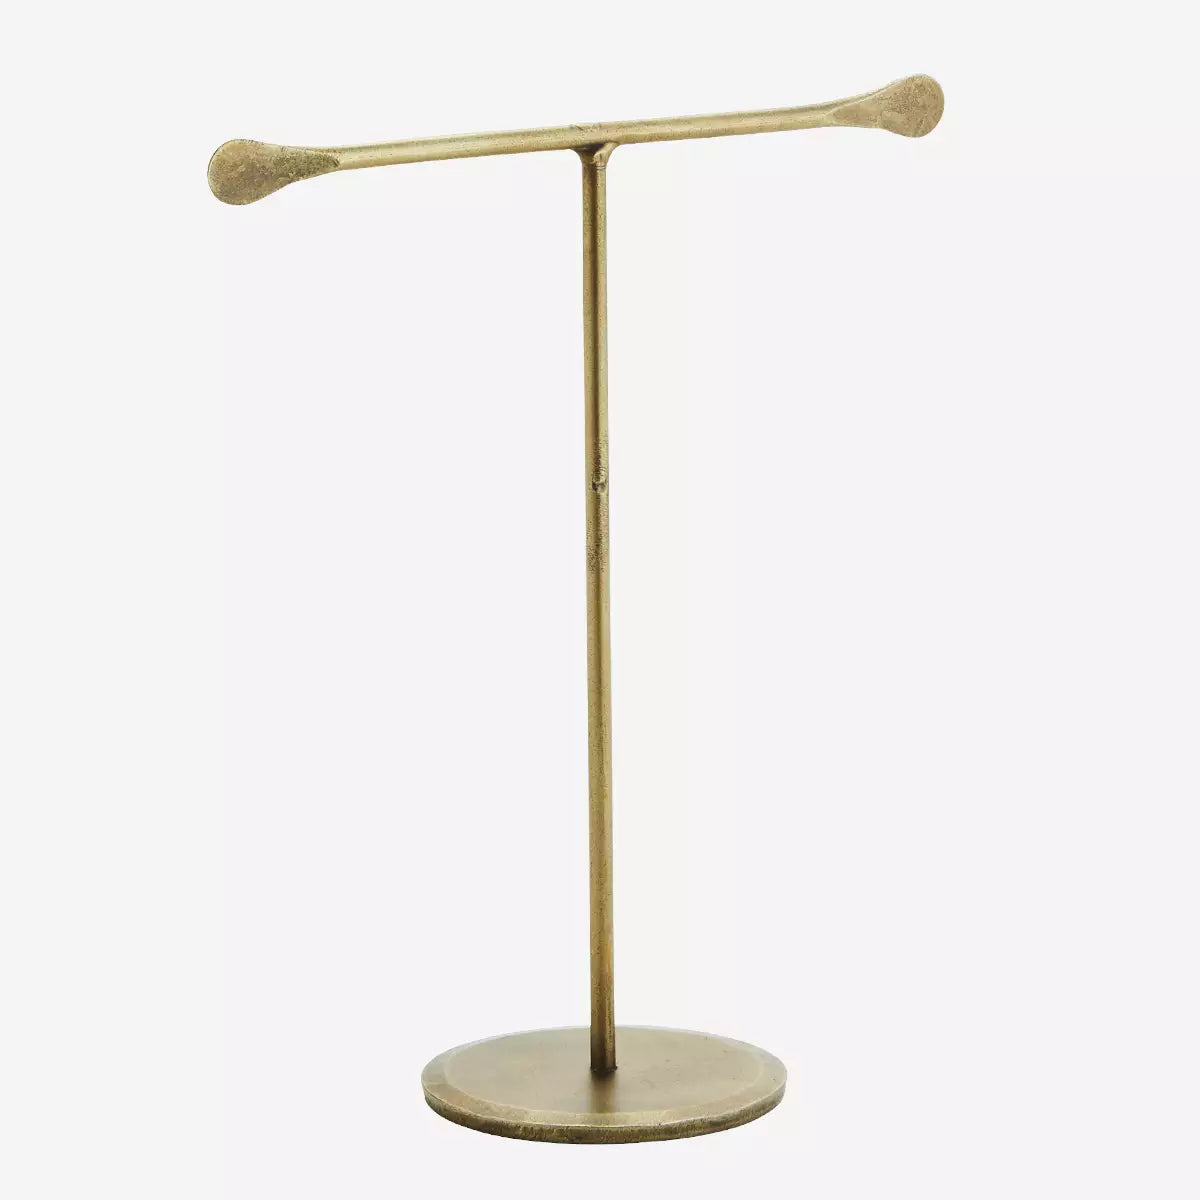 19cm Hand Forged Iron Jewellery Stand - Gold